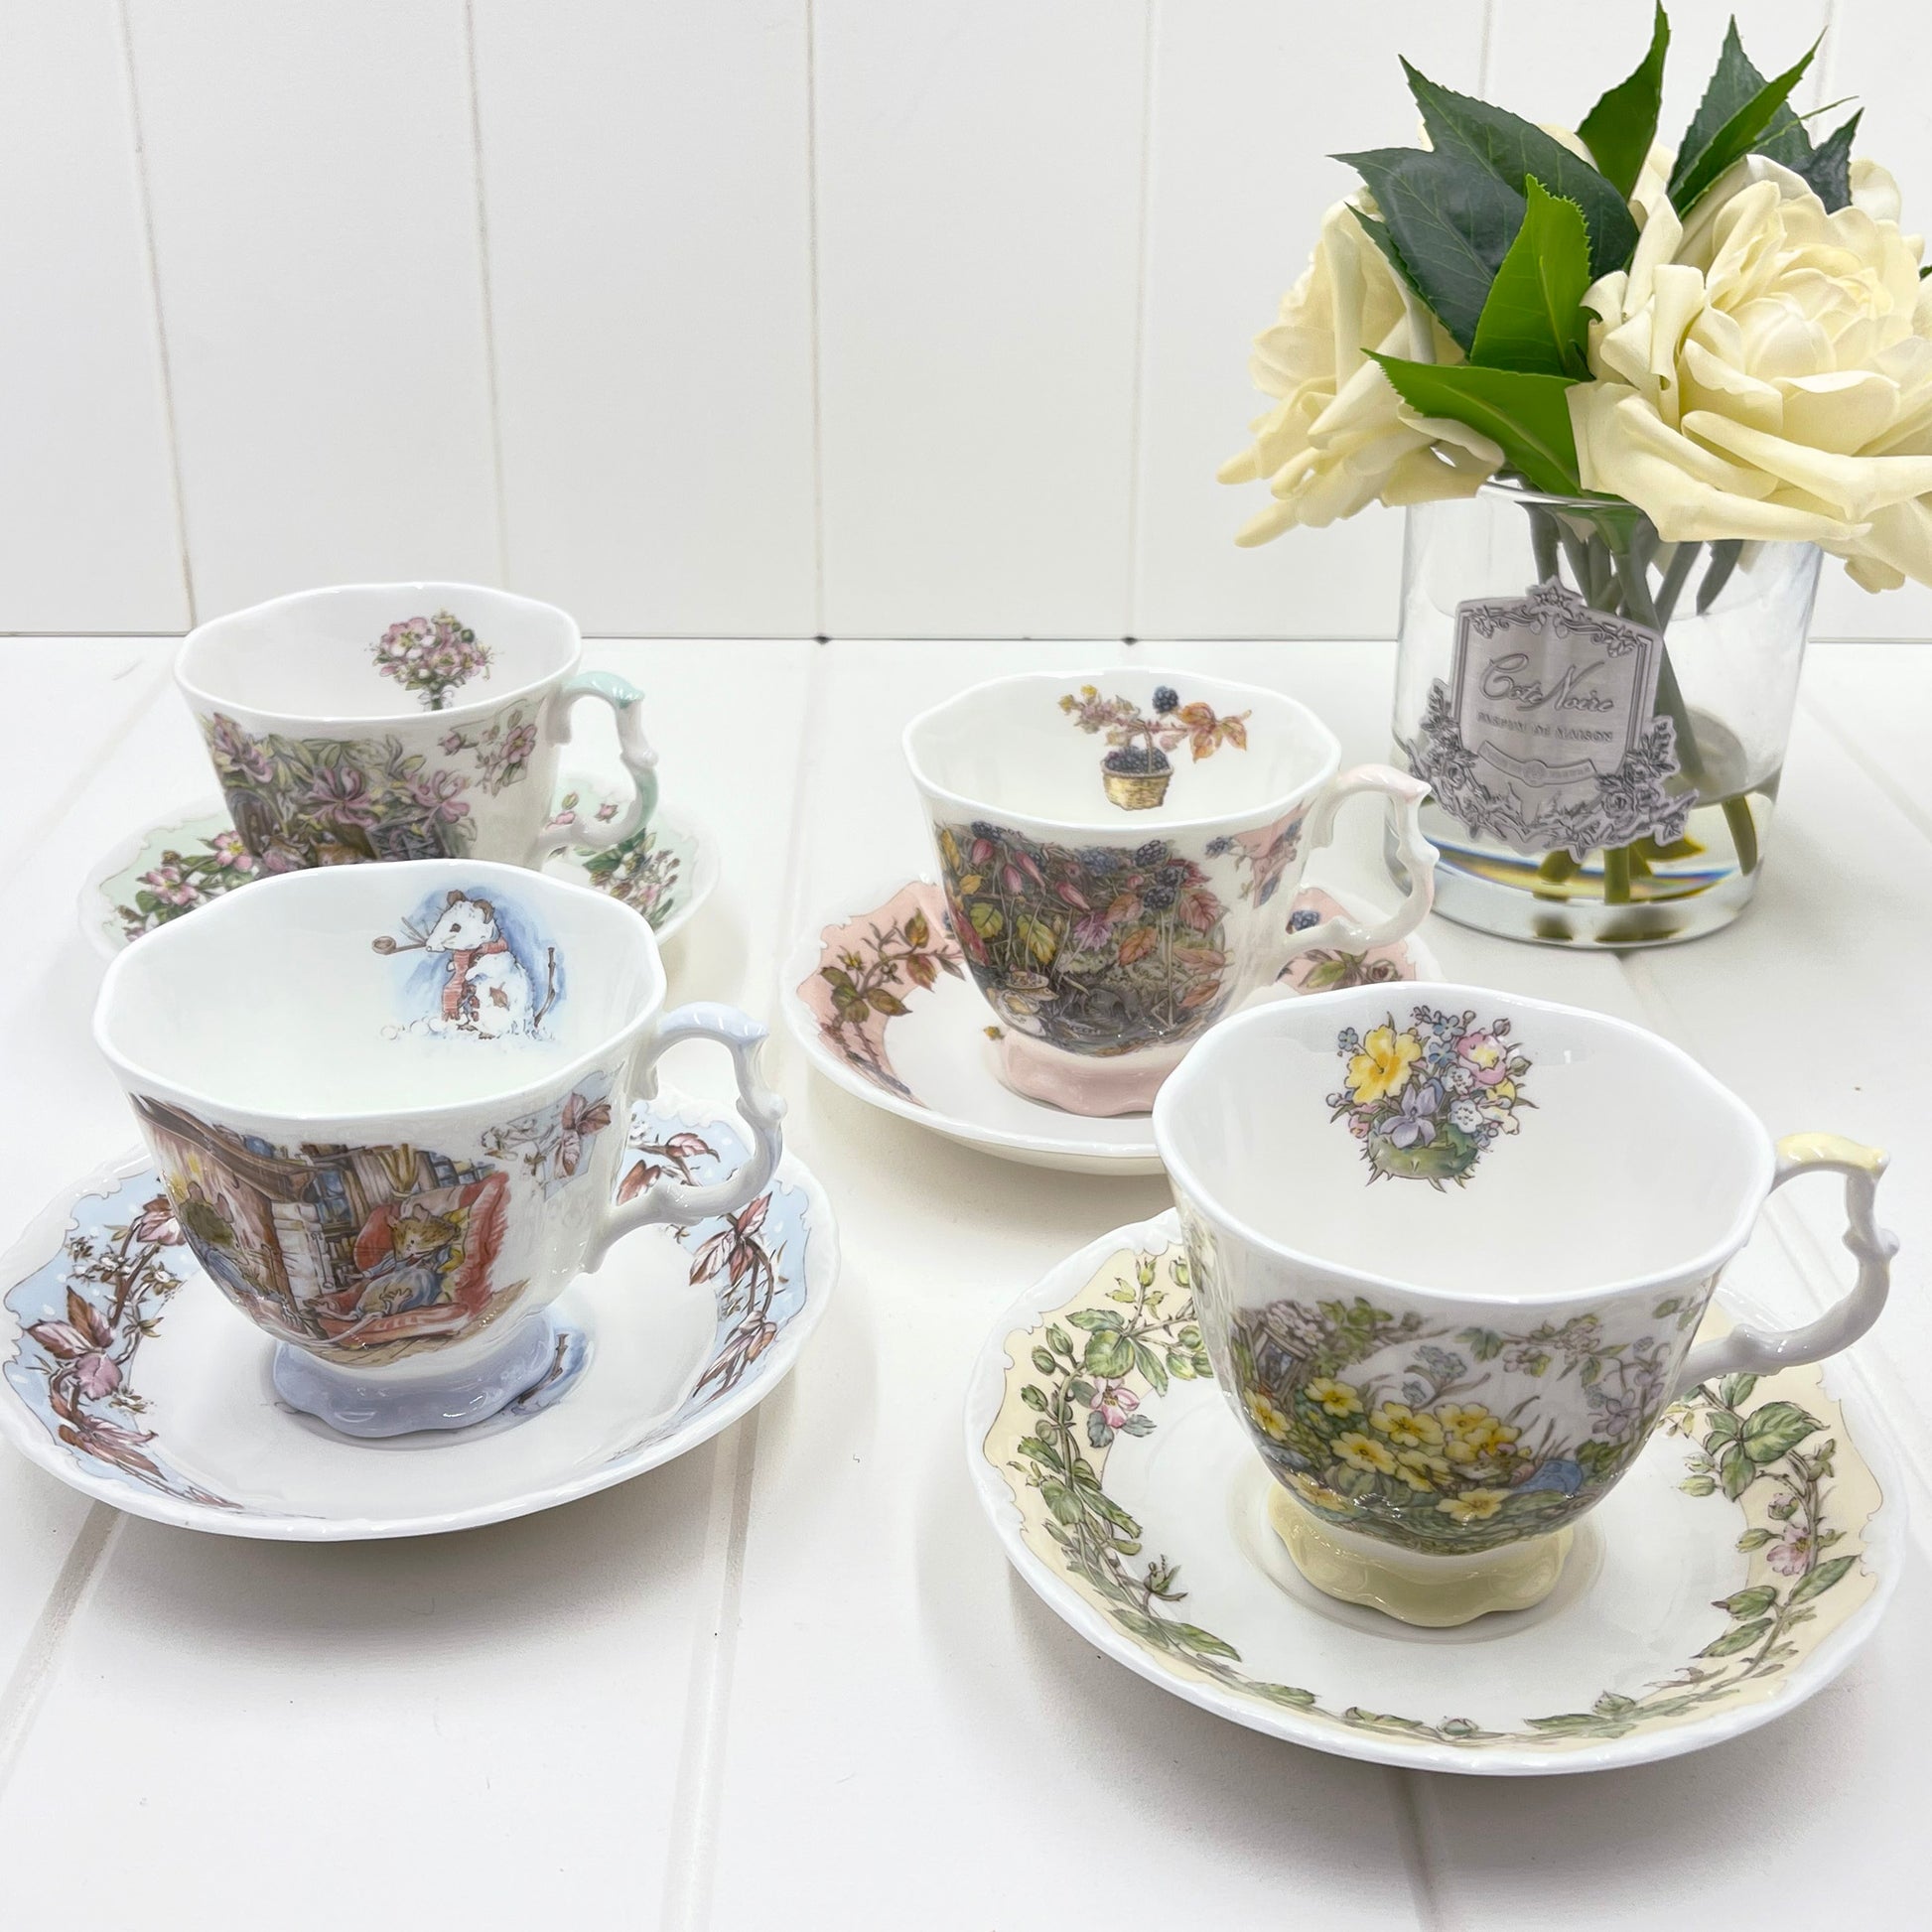 Royal Doulton Brambly Hedge Four Seasons Cup and Saucer - Winter